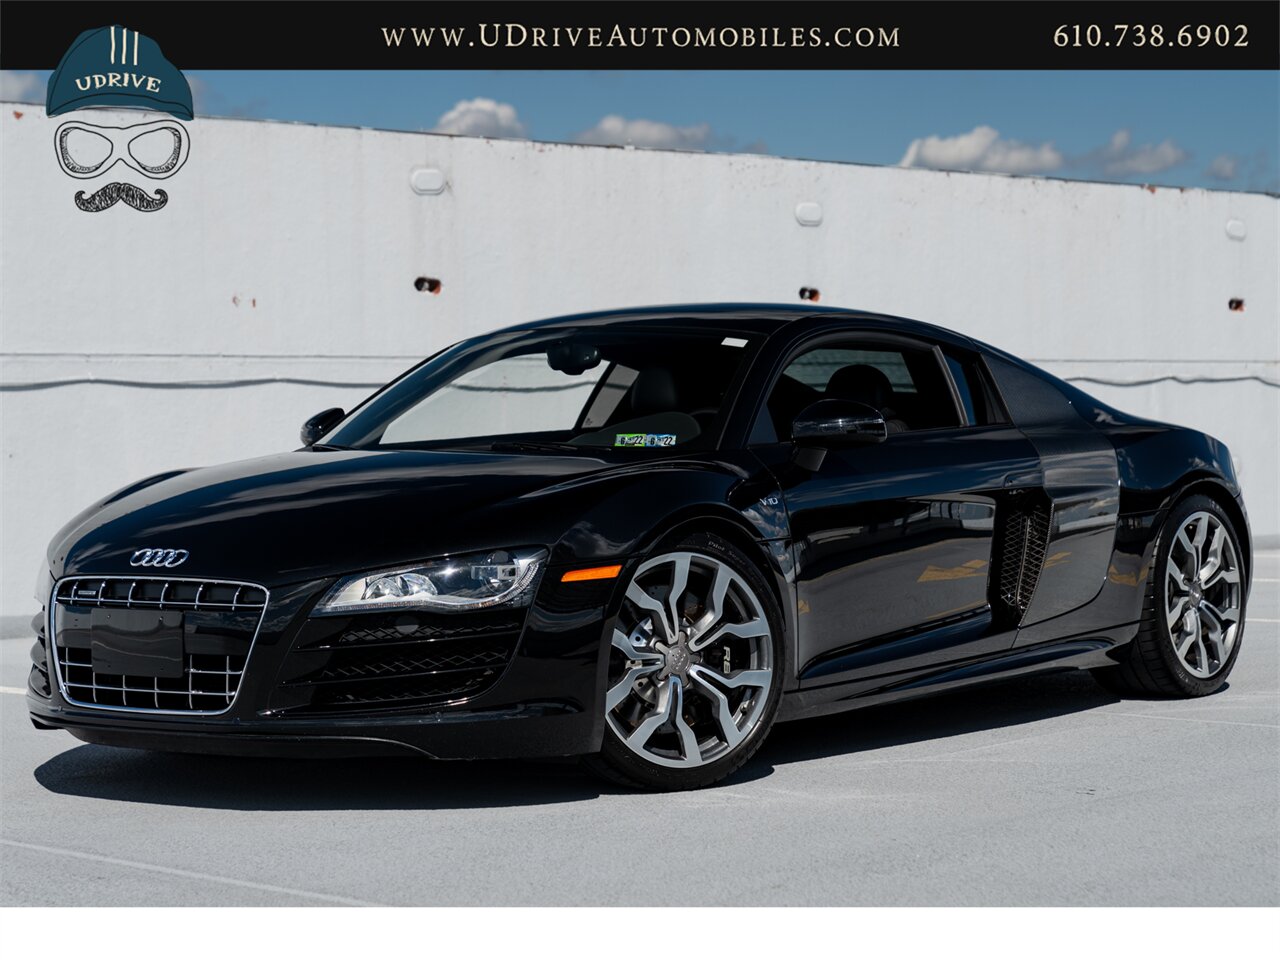 2011 Audi R8 5.2 Quattro  V10 6 Speed Manual - Photo 1 - West Chester, PA 19382